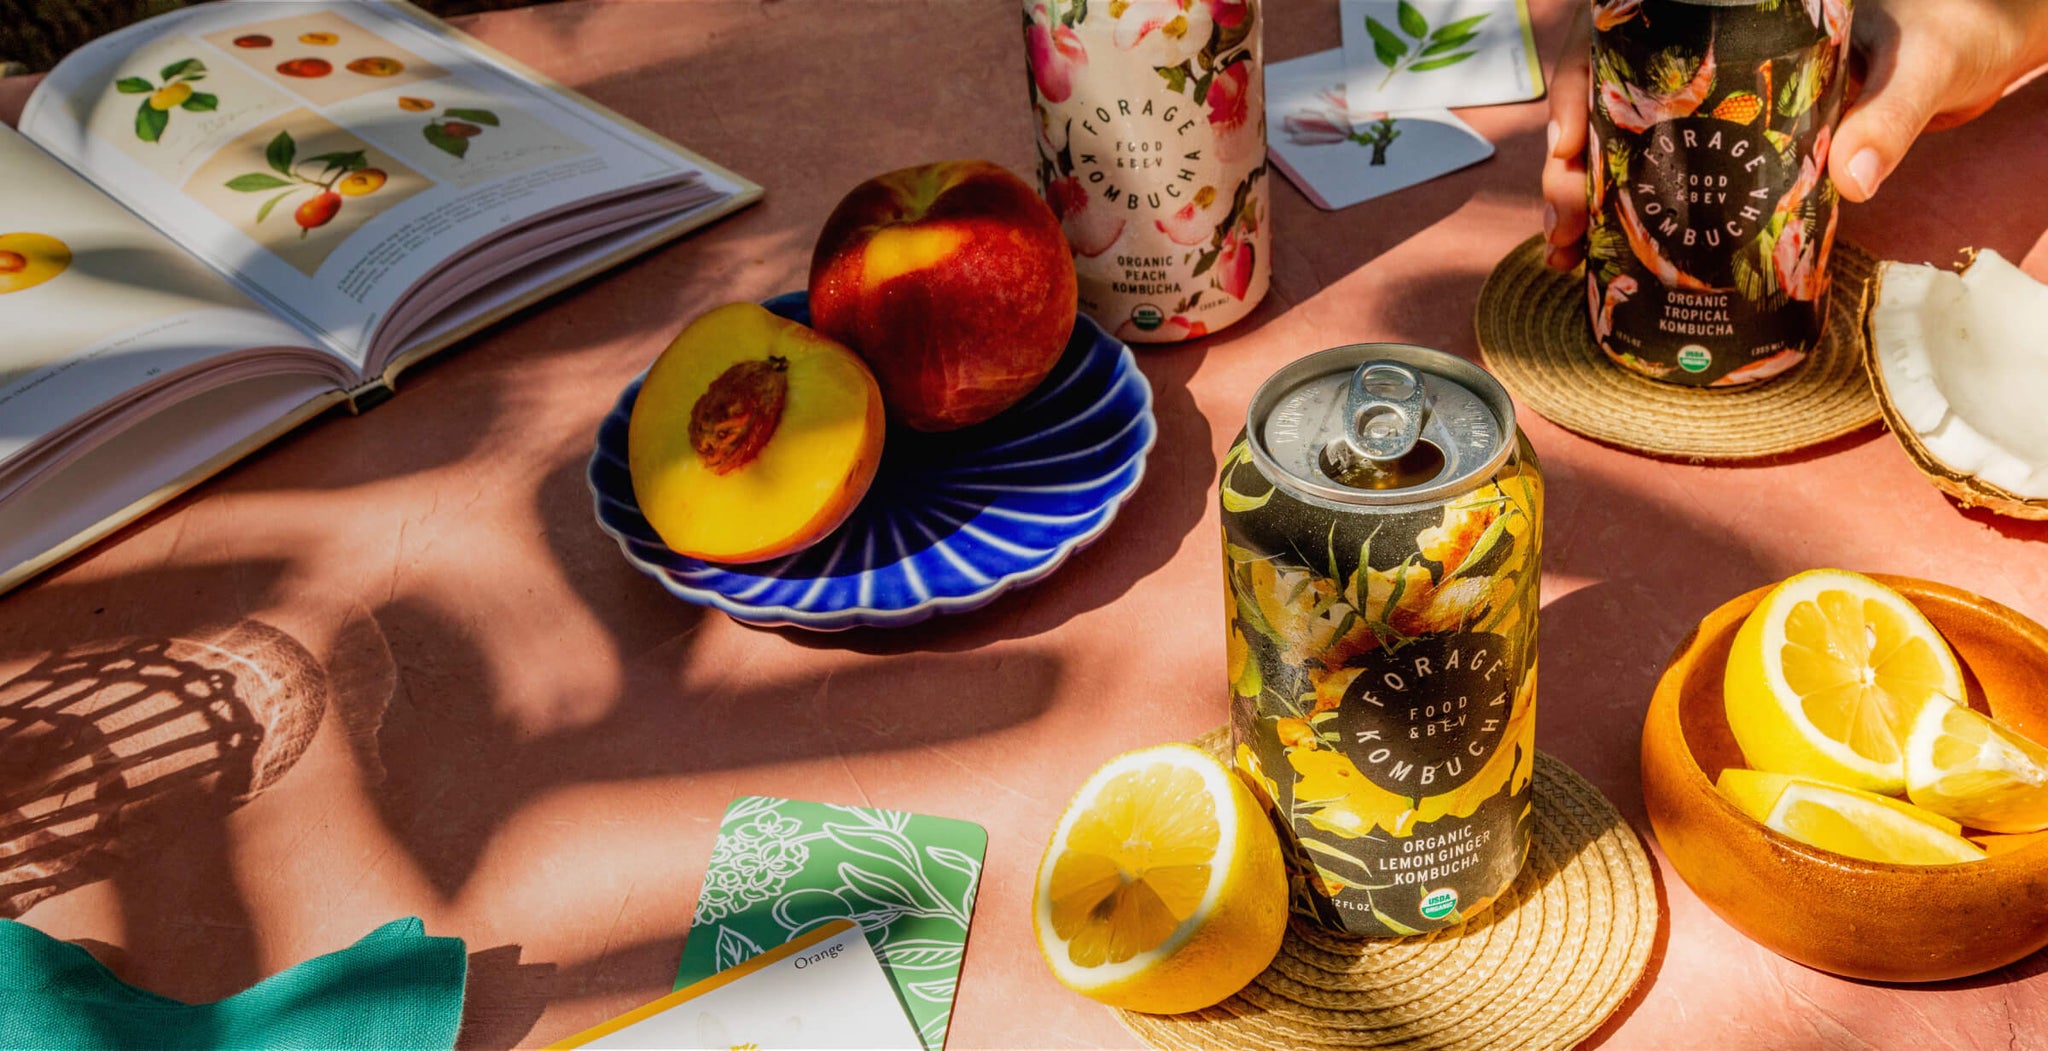 A tables cape with an open book, peaches, lemons, playing cards, and some cans of Forage Kombucha.